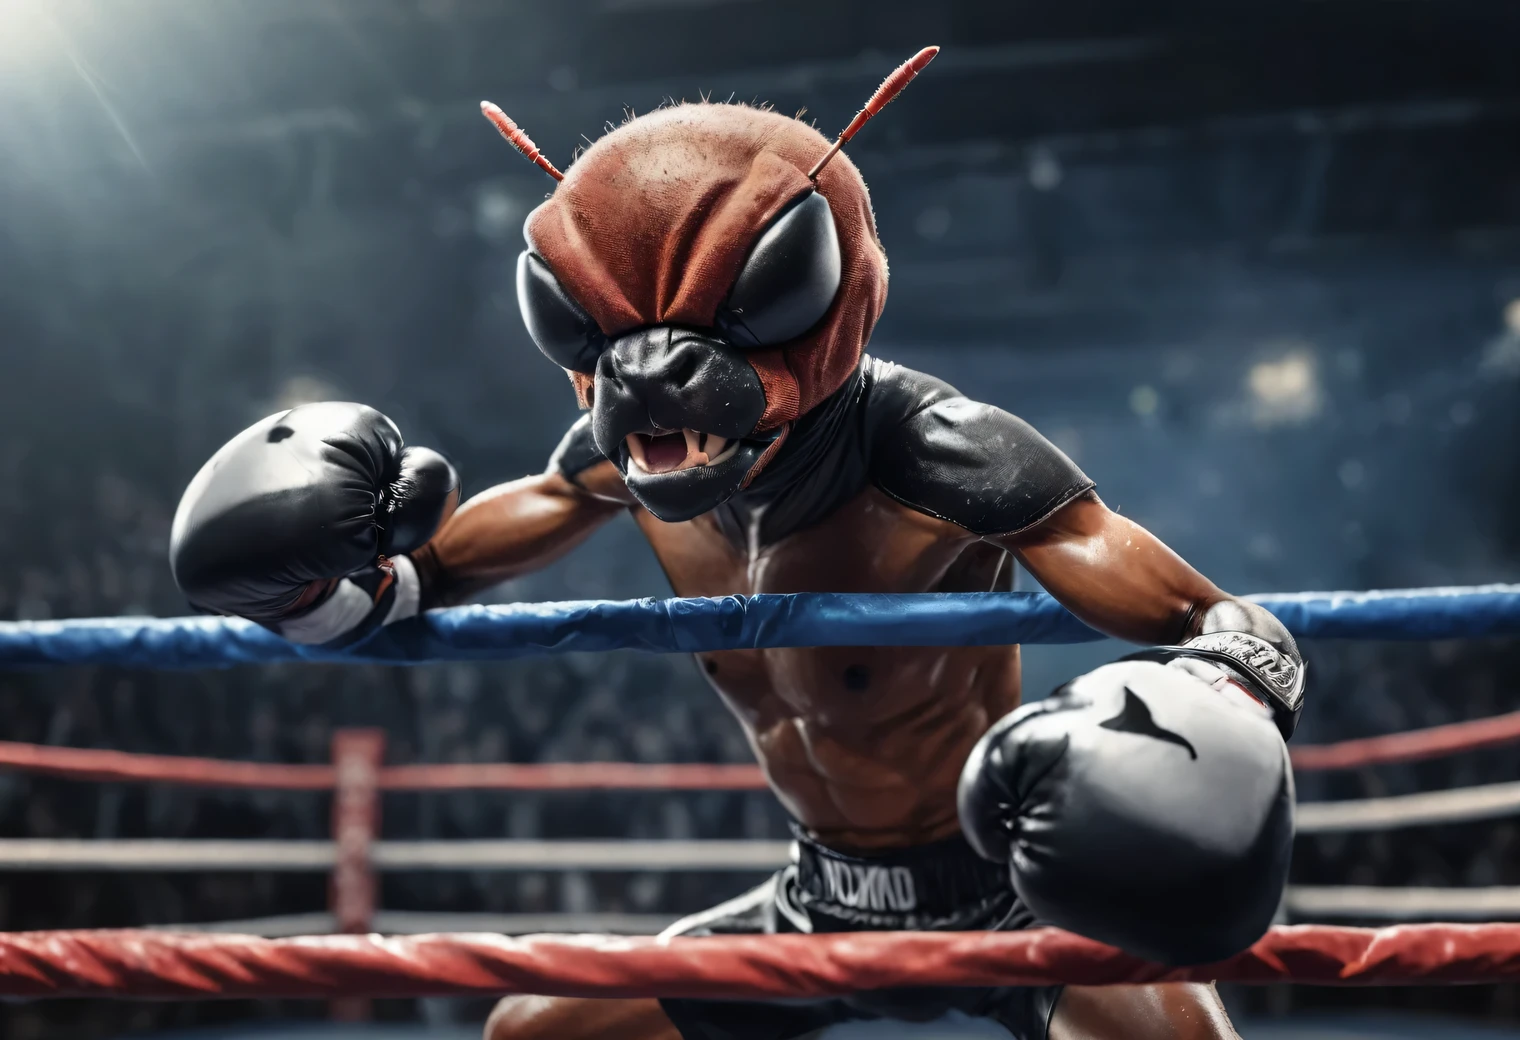 Dynamic frame, 2 humanoid (anthropomorphic) boxer ants, humanoid ants in a boxing ring, humanoid ant in a boxing stance ready to strike, boxing match 2 humanoid ants, photorealistic, high quality, high detail, focus on humanoid ants, focus in the center of the frame, blurred background